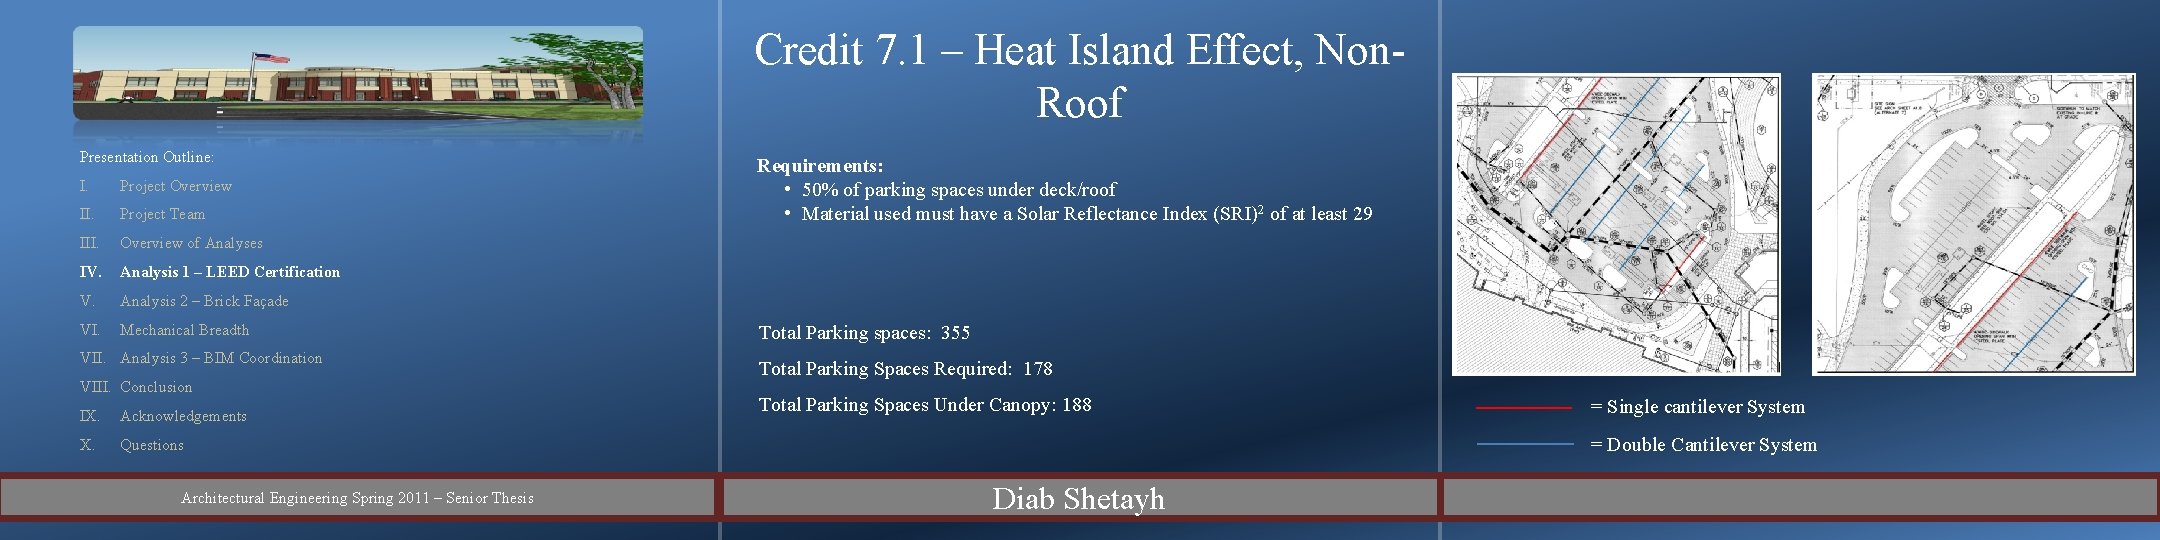 Credit 7. 1 – Heat Island Effect, Non. Roof Presentation Outline: I. Project Overview